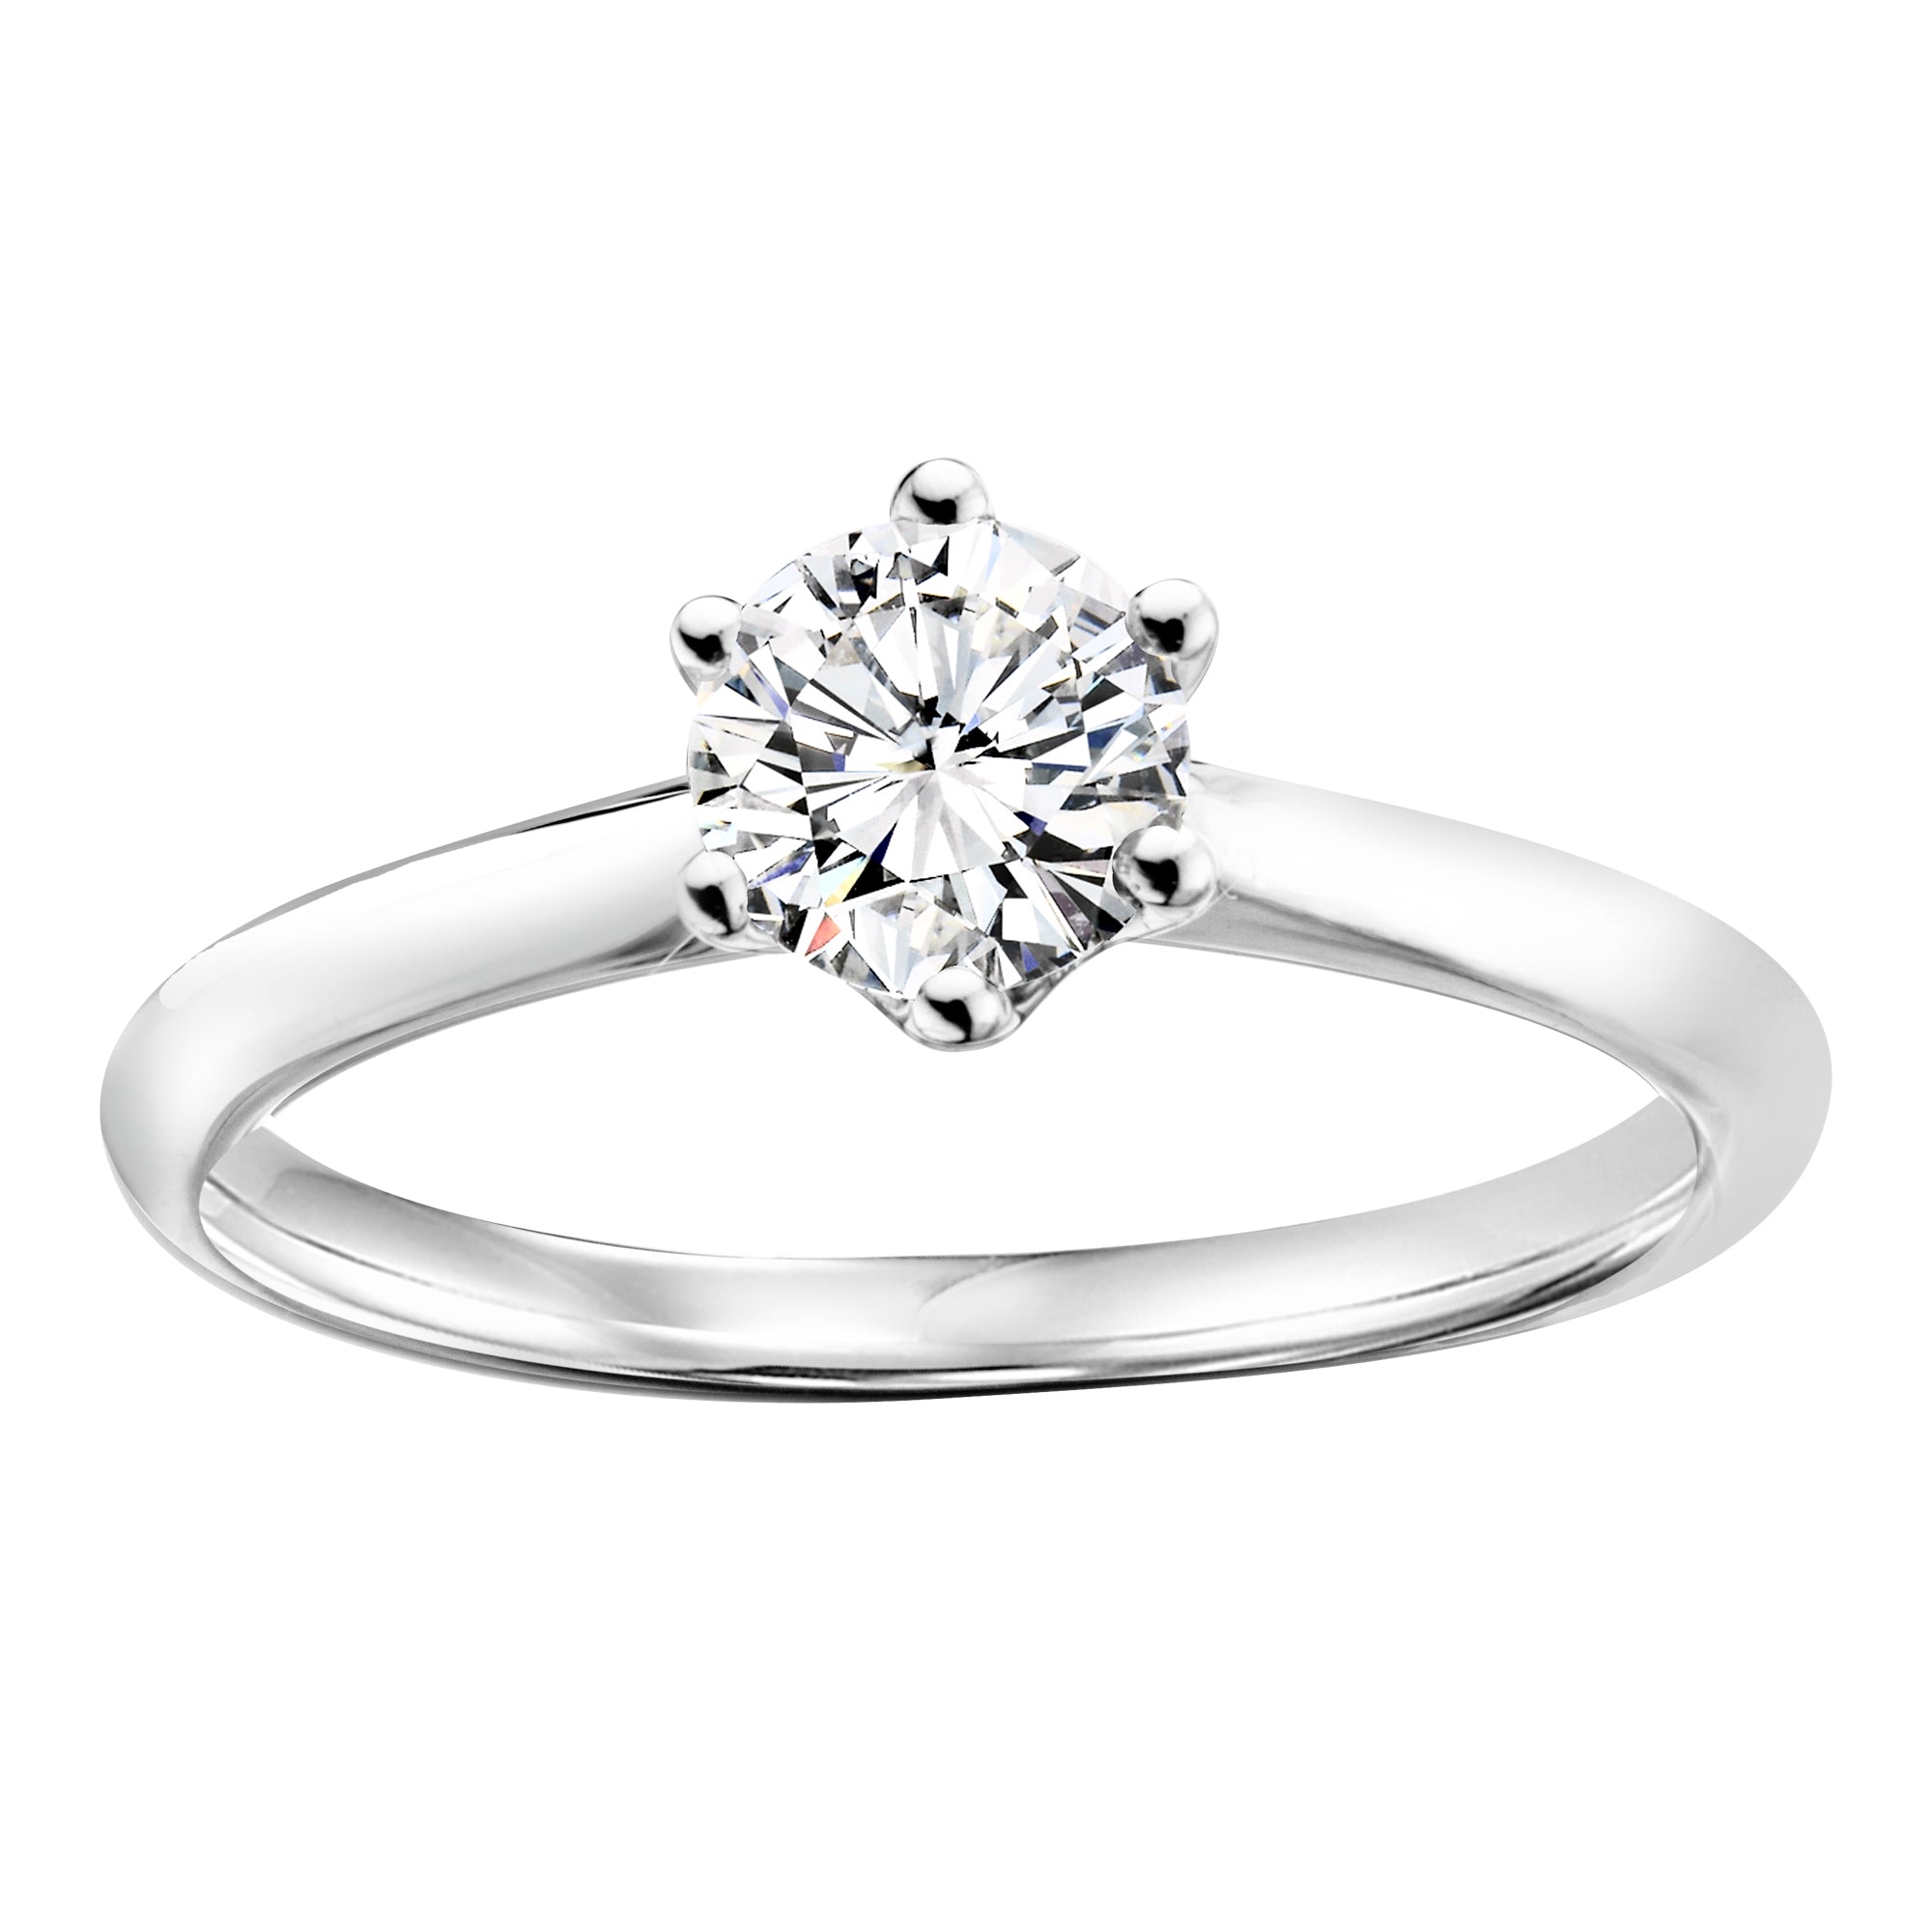 Sterling Silver Cubic Zirconia 1.00ct Ring - AK1020 - Hallmark Jewellers Formby & The Jewellers Bench Widnes